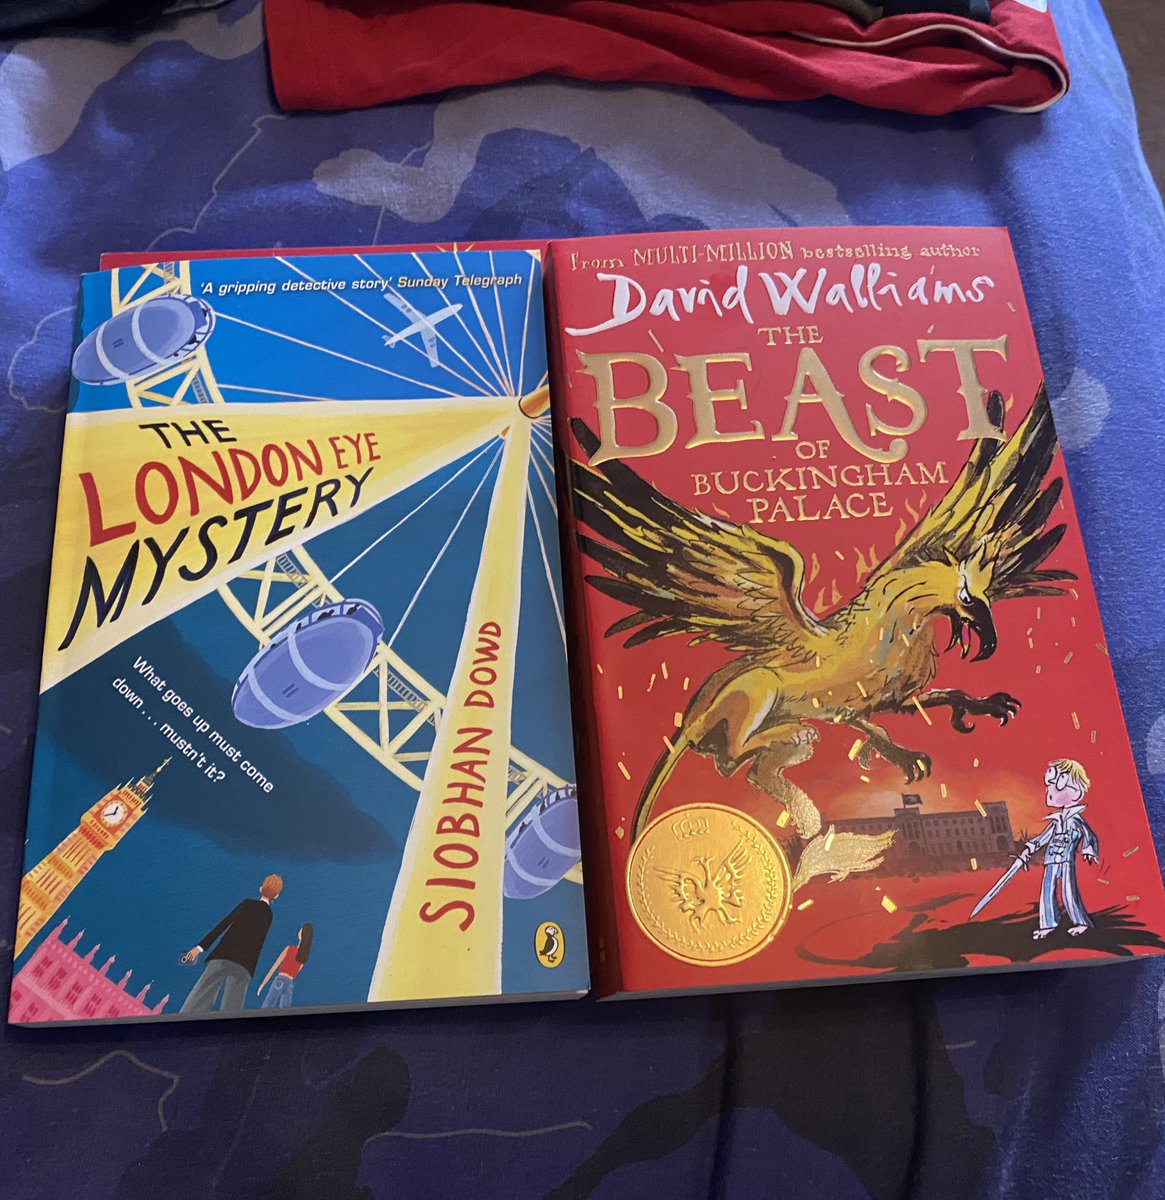 @MasefieldCP James has chosen the perfect books for a long coach journey to London tomorrow @davidwalliams #thelondoneyemystery #thebeastofbuckinghampalace